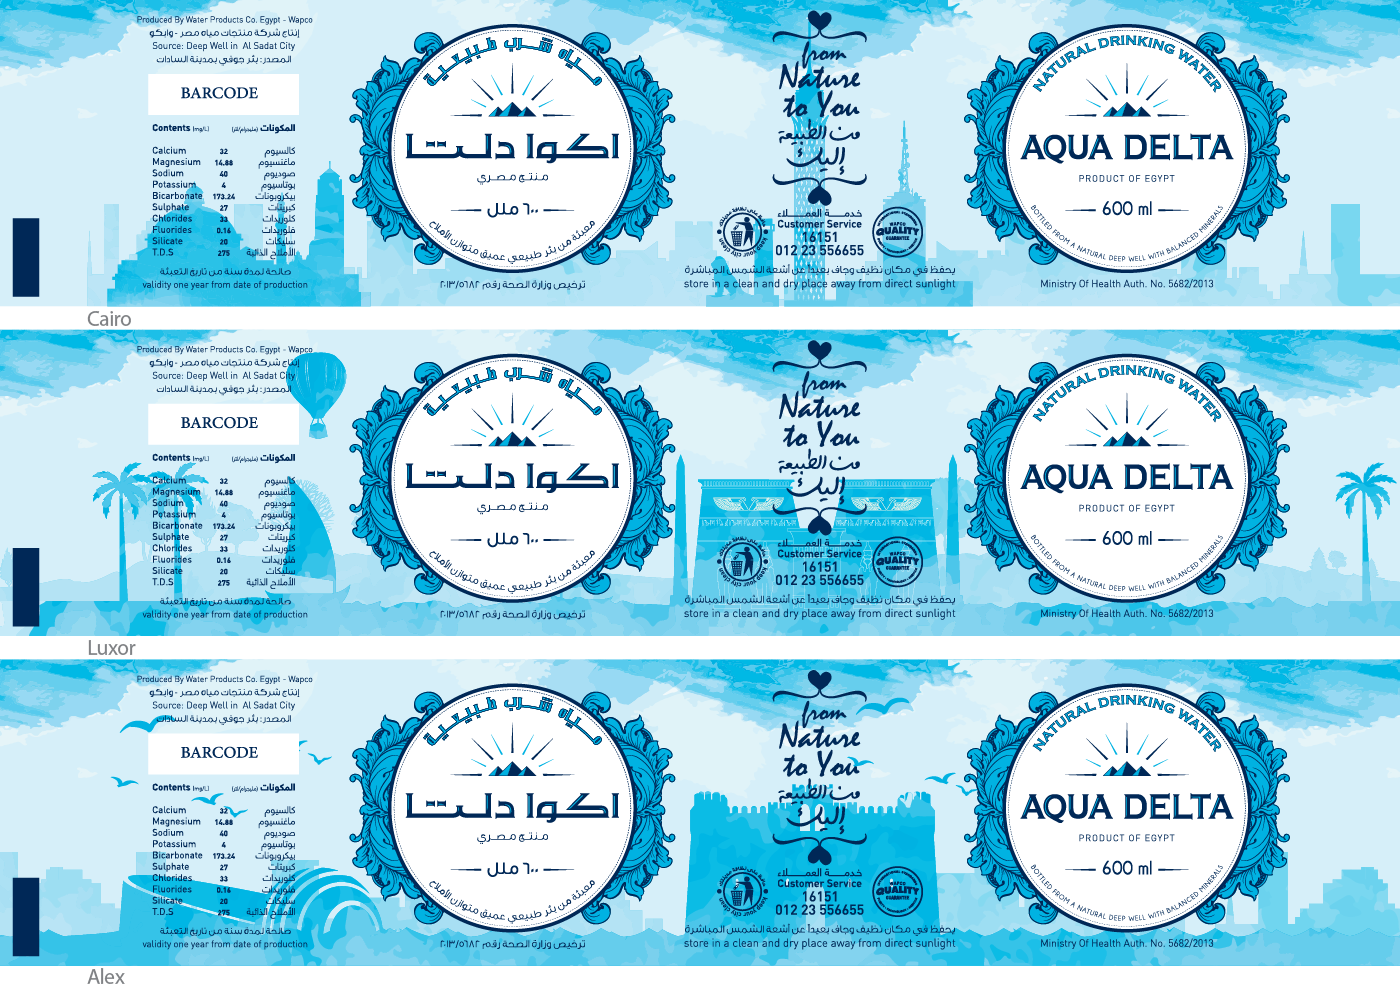 Detail labels. Mineral Water Label. Mineral Water Label Design. Water Label Design креатив. Mineral Water logo.